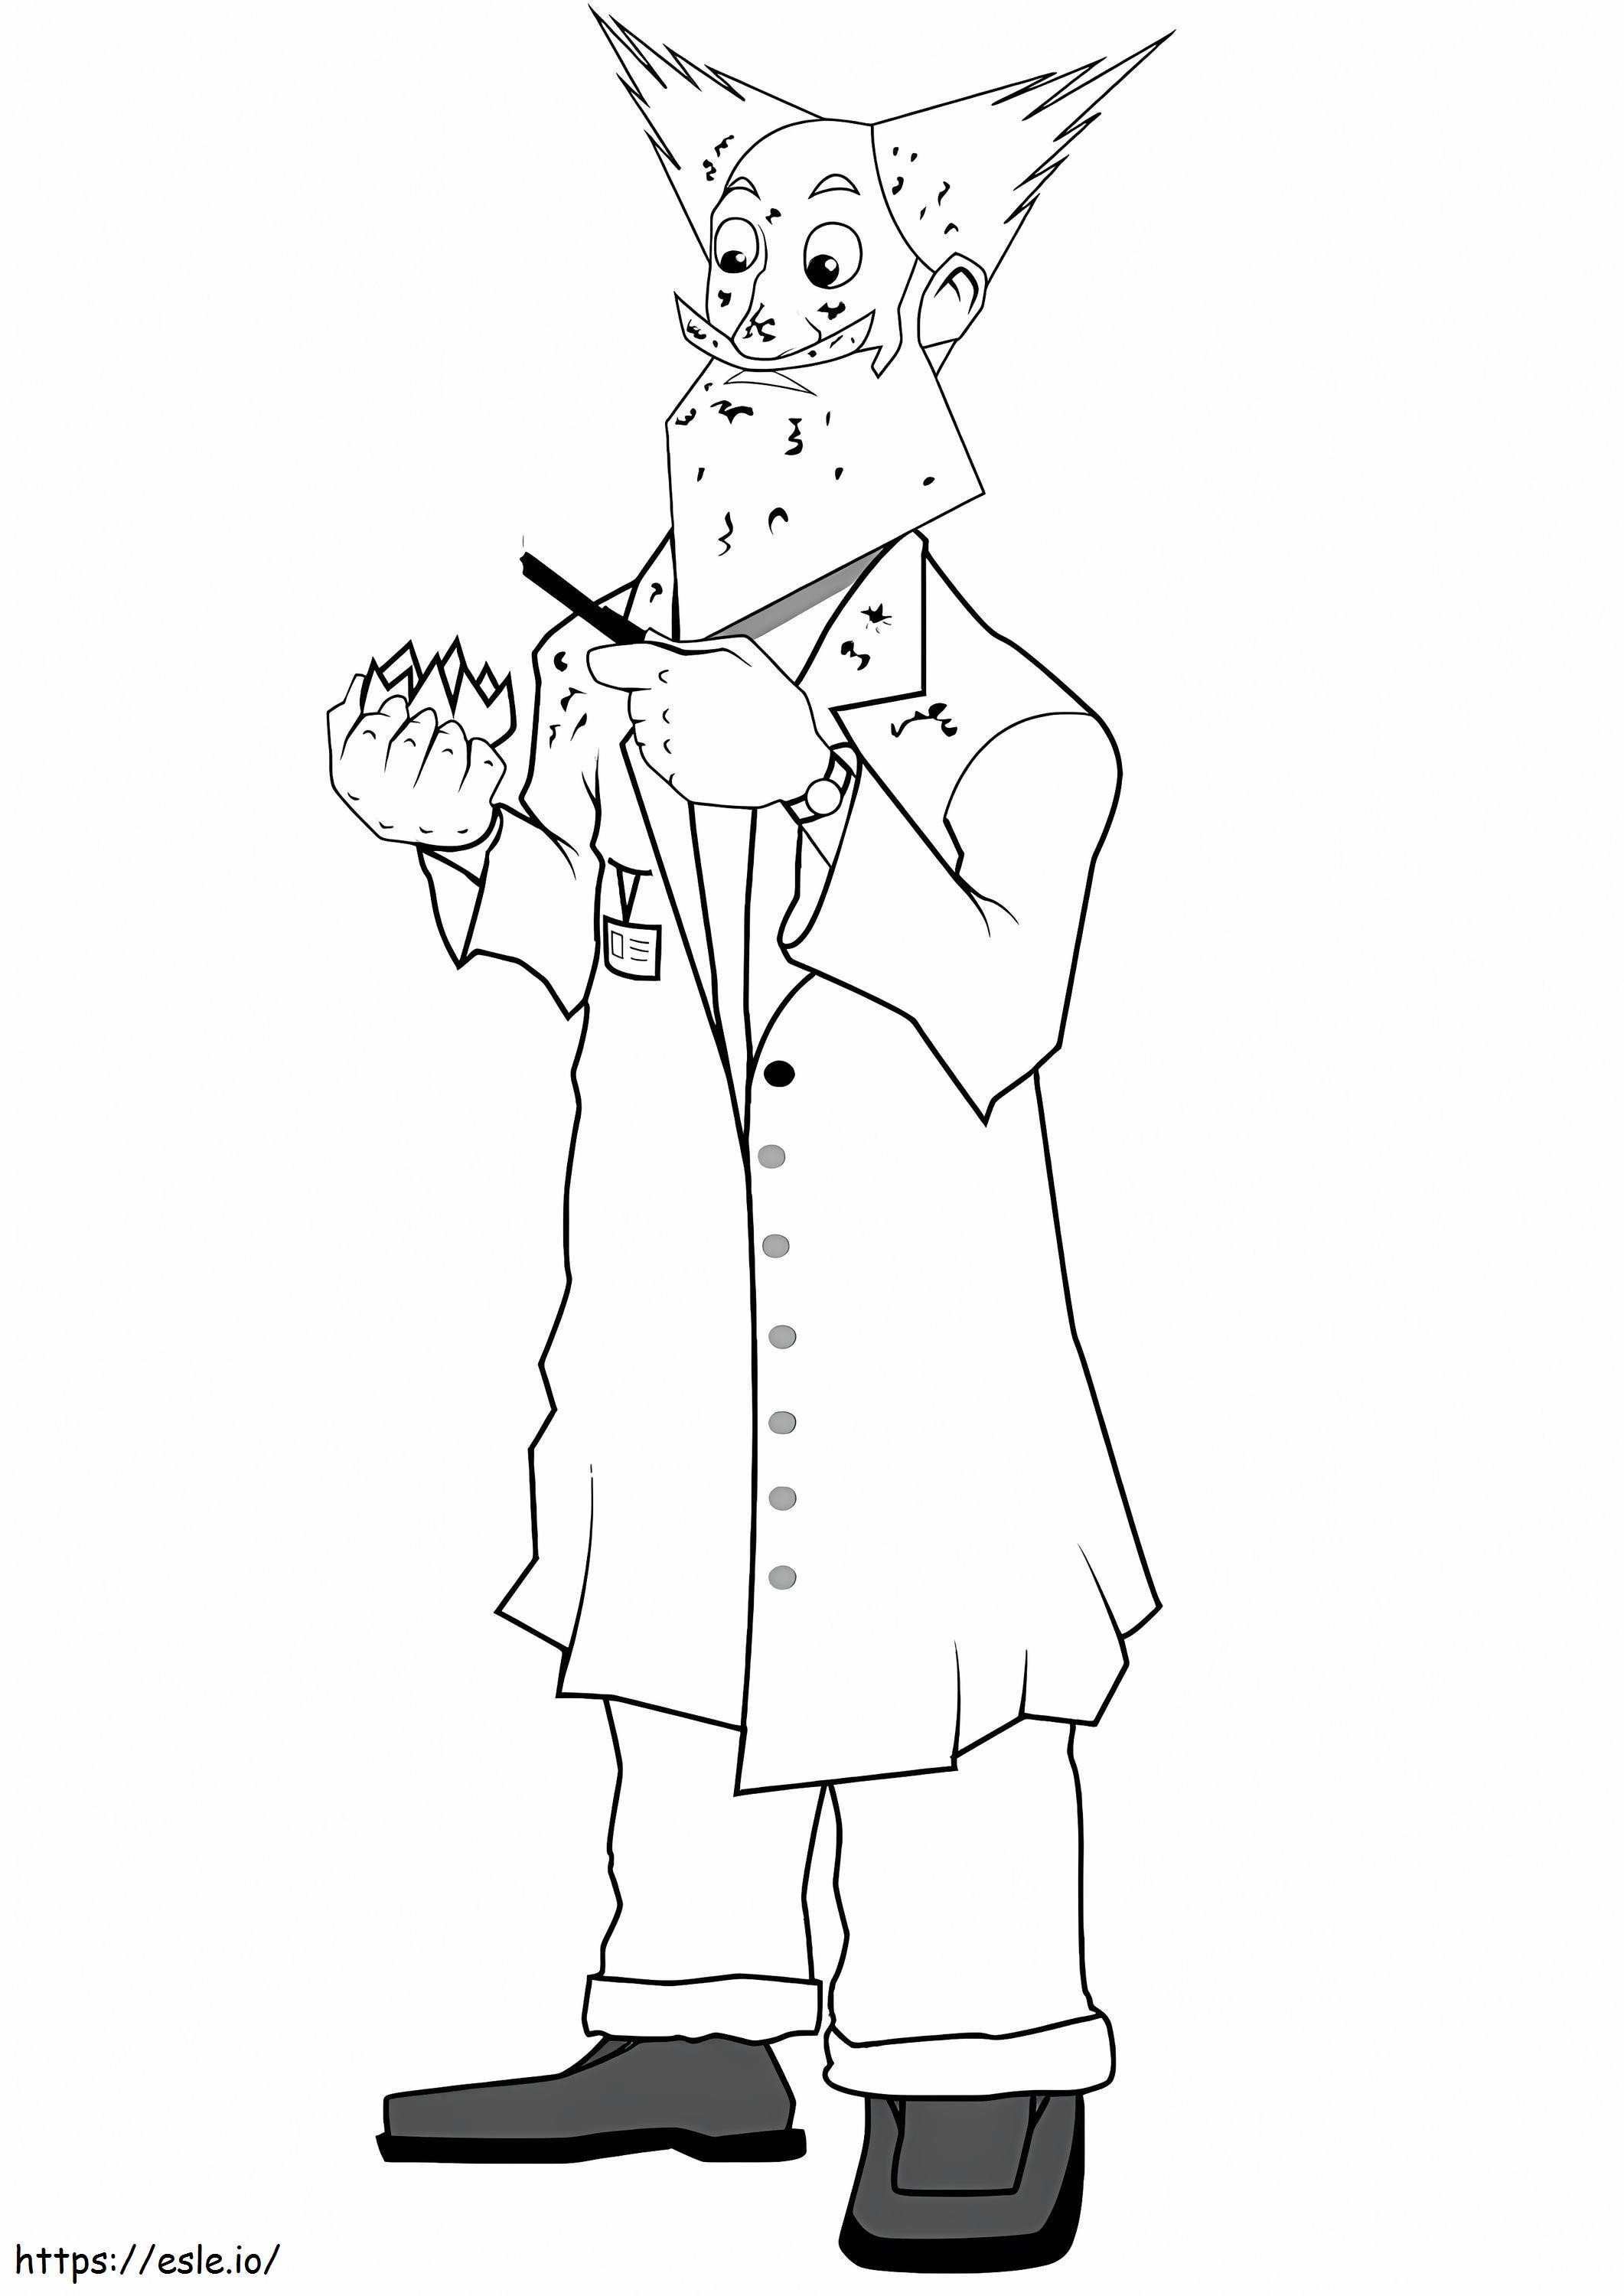 Scientist Failed Experiment coloring page